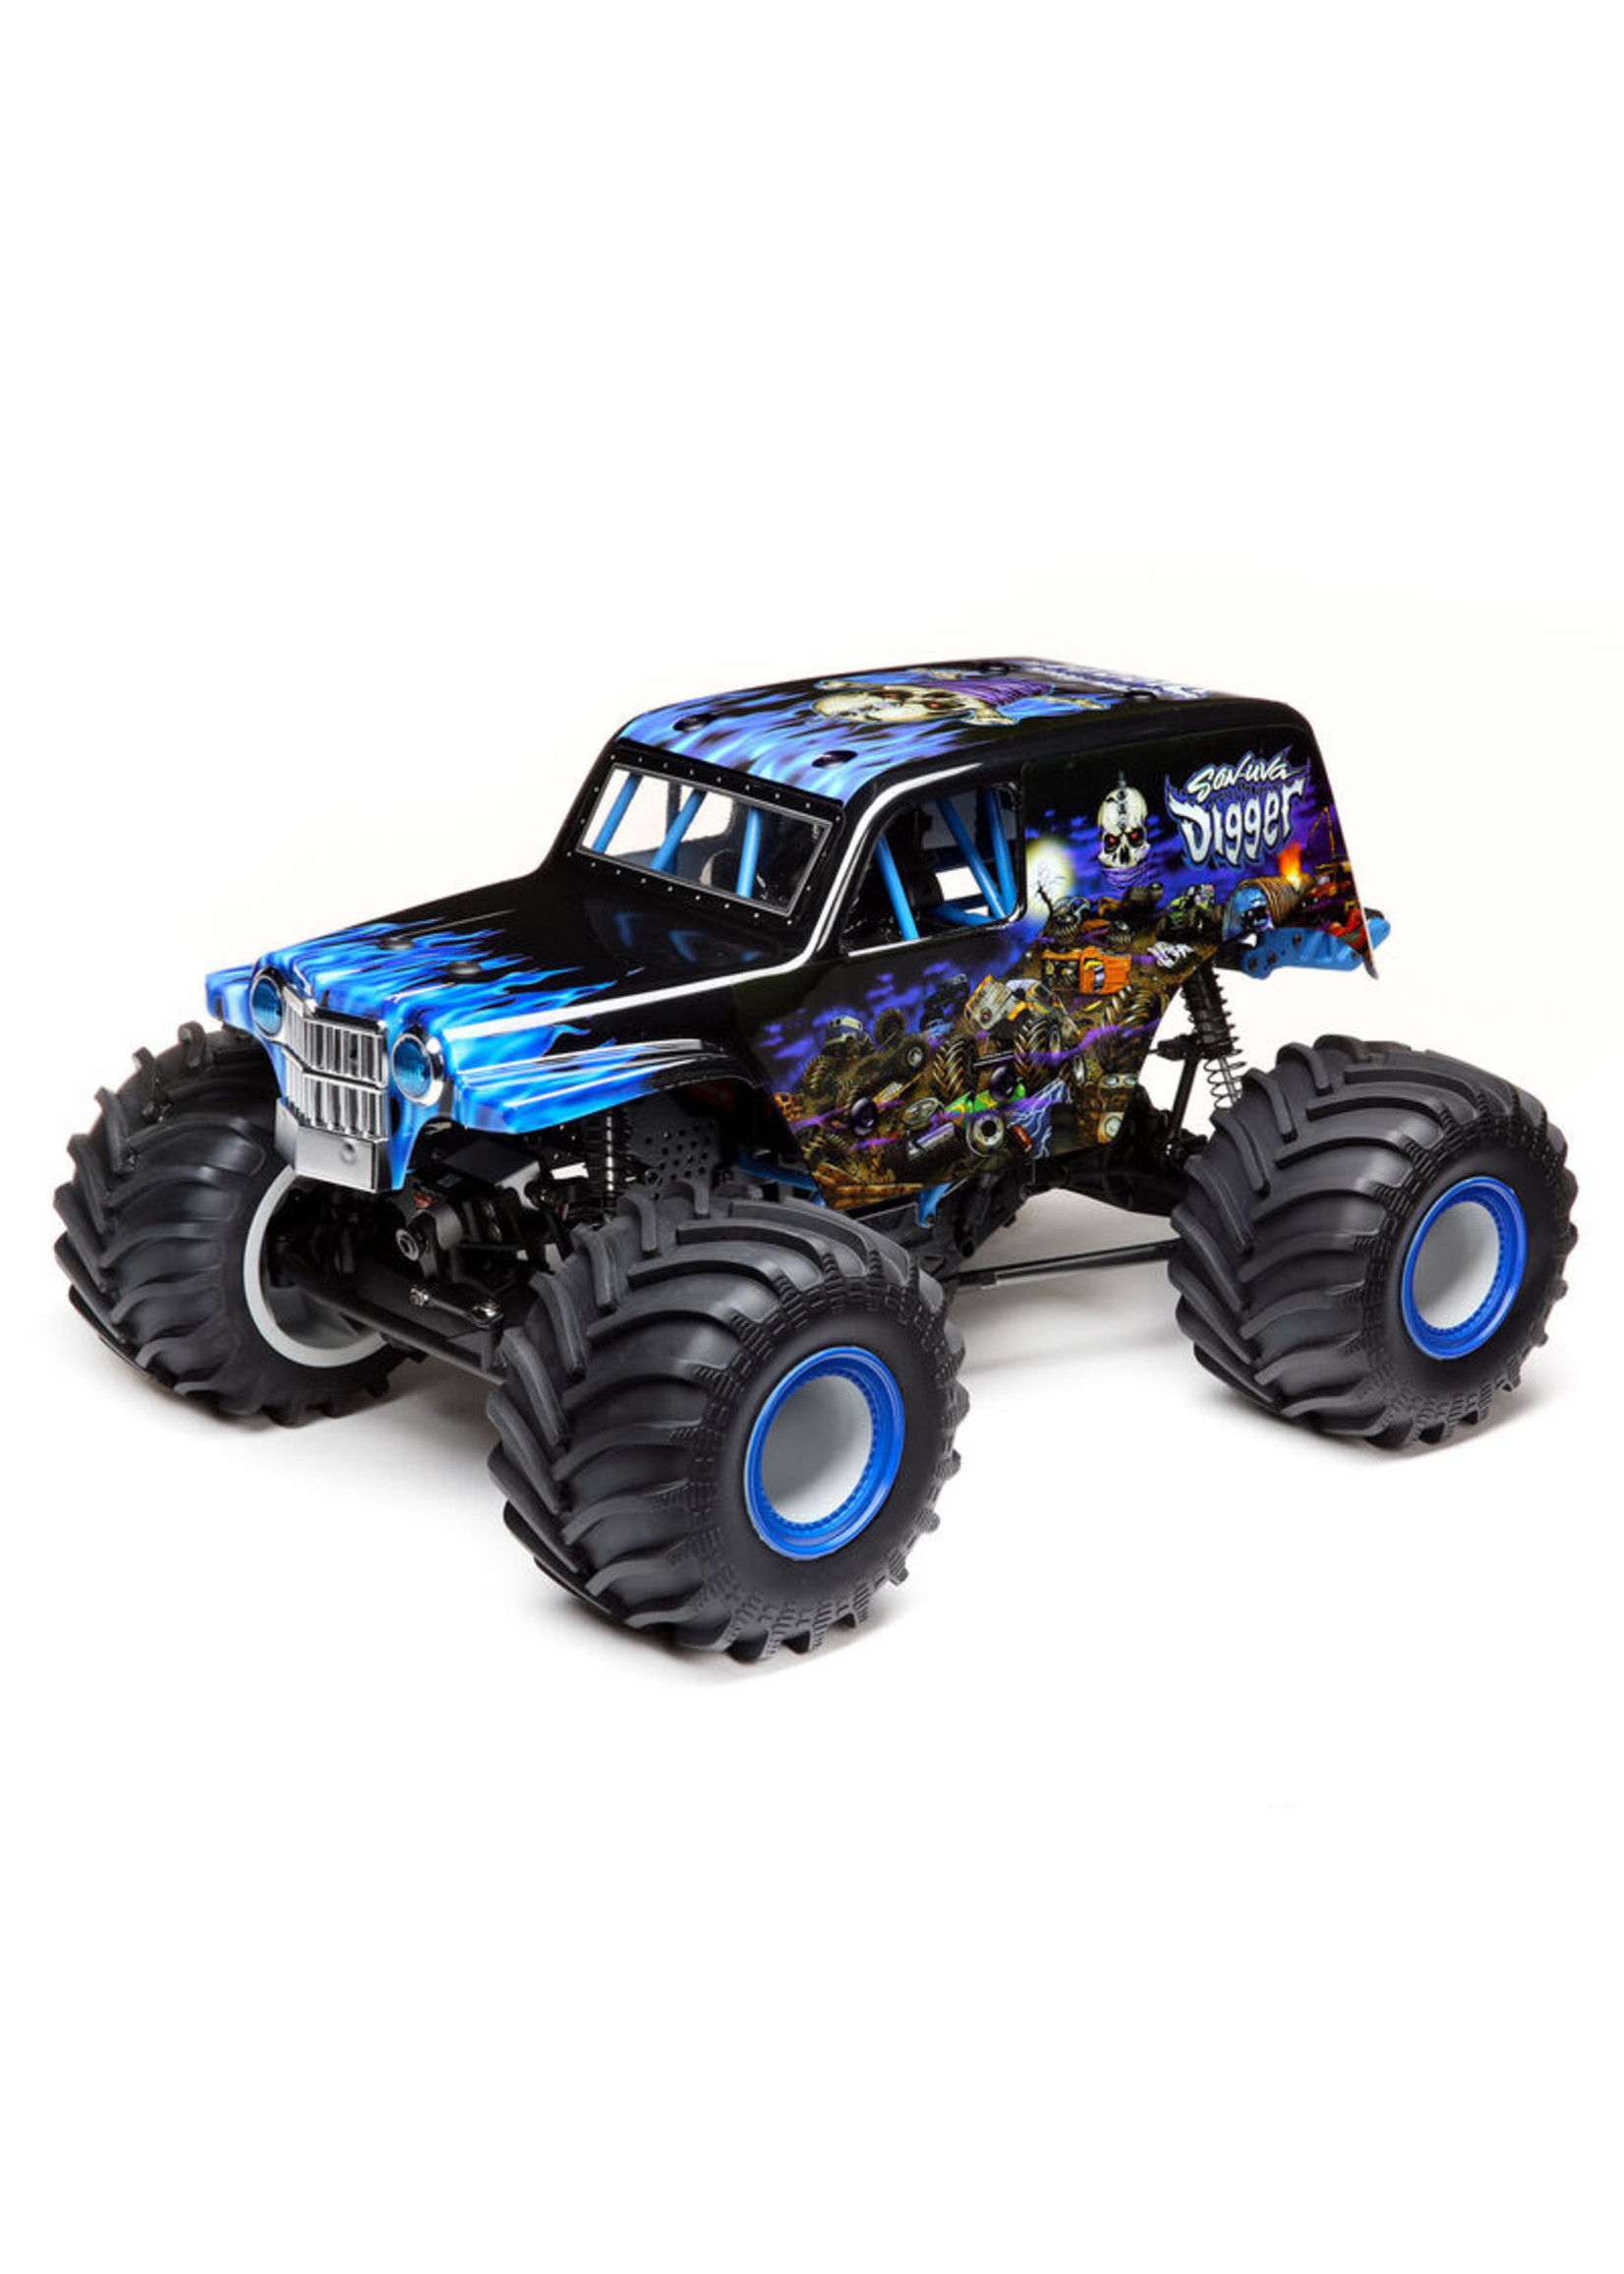 monster jam son uva digger coloring pages